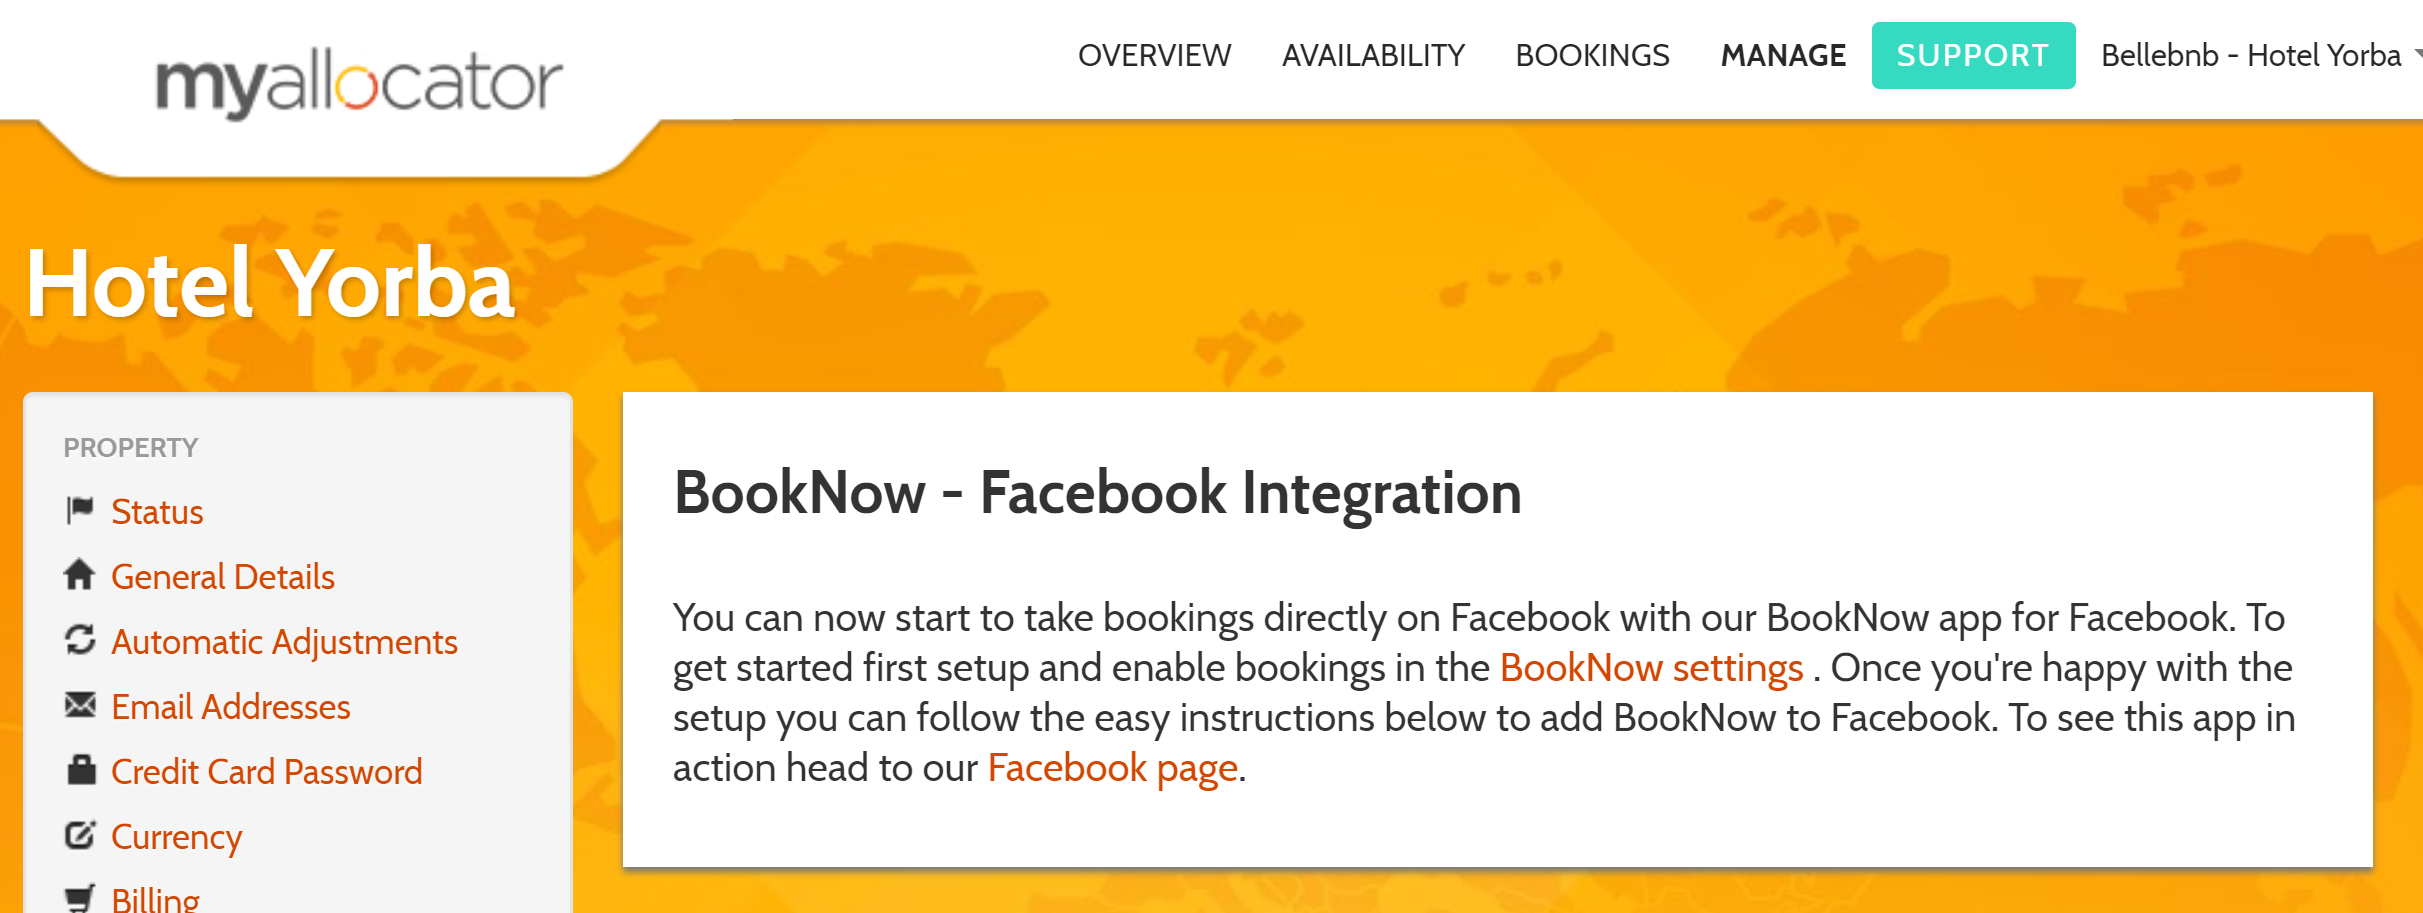 Facebook Integration You can accept reservations directly from your hotel’s Facebook page using one of the embedding widgets available through our channel manager. Adding a booking widget can be done in just a couple of steps, and all your reservations that come in through your Facebook page are commission free